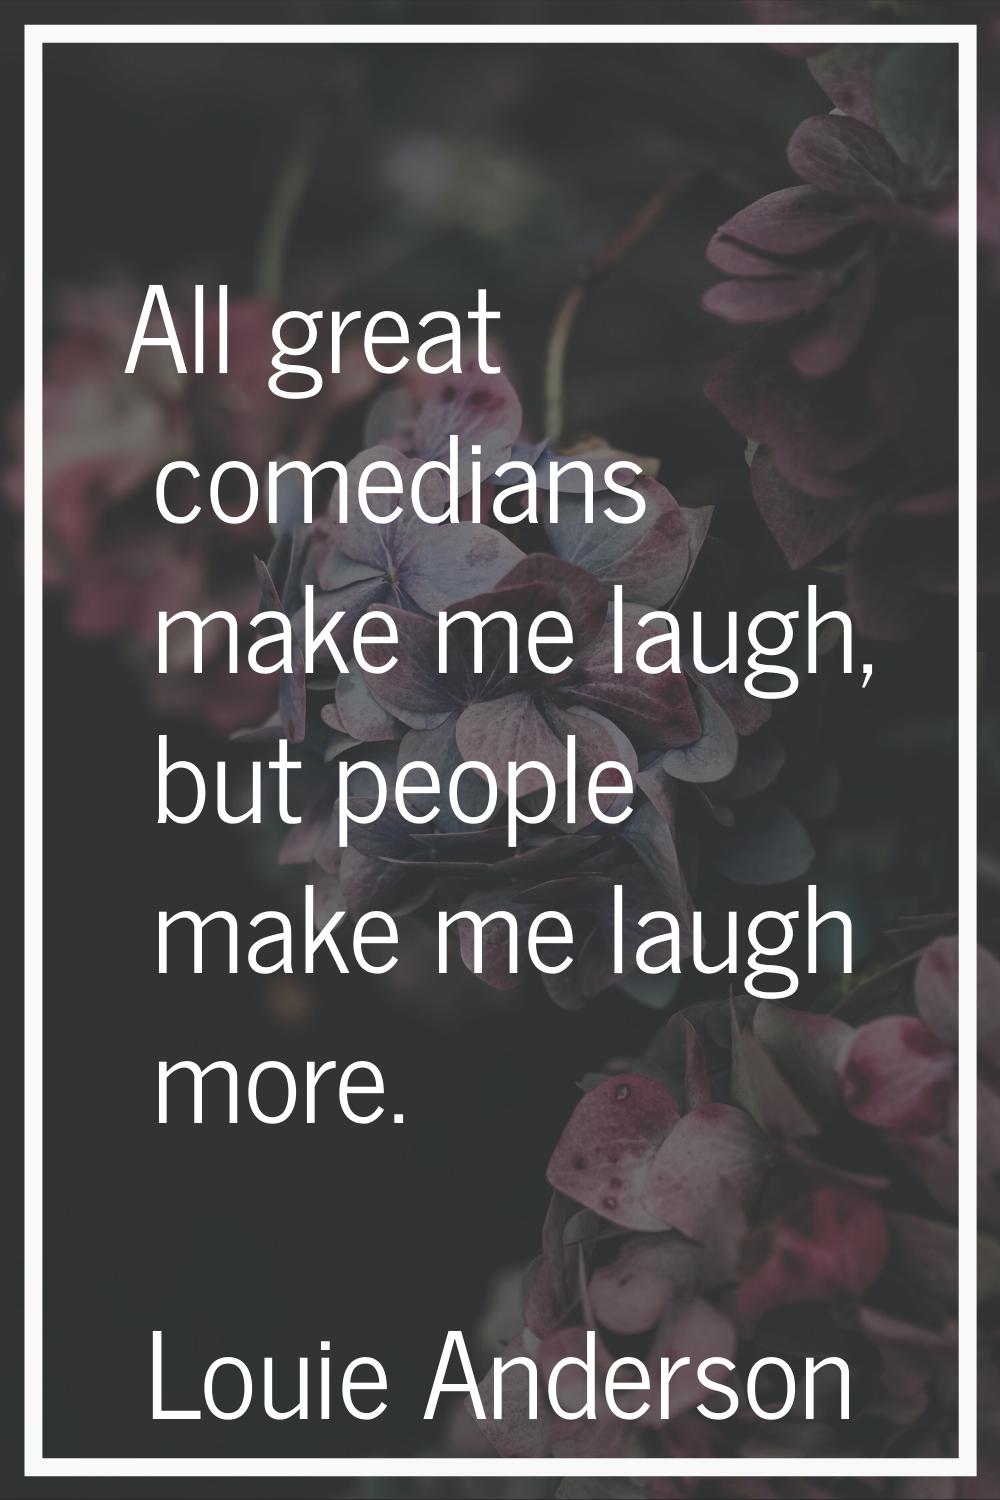 All great comedians make me laugh, but people make me laugh more.